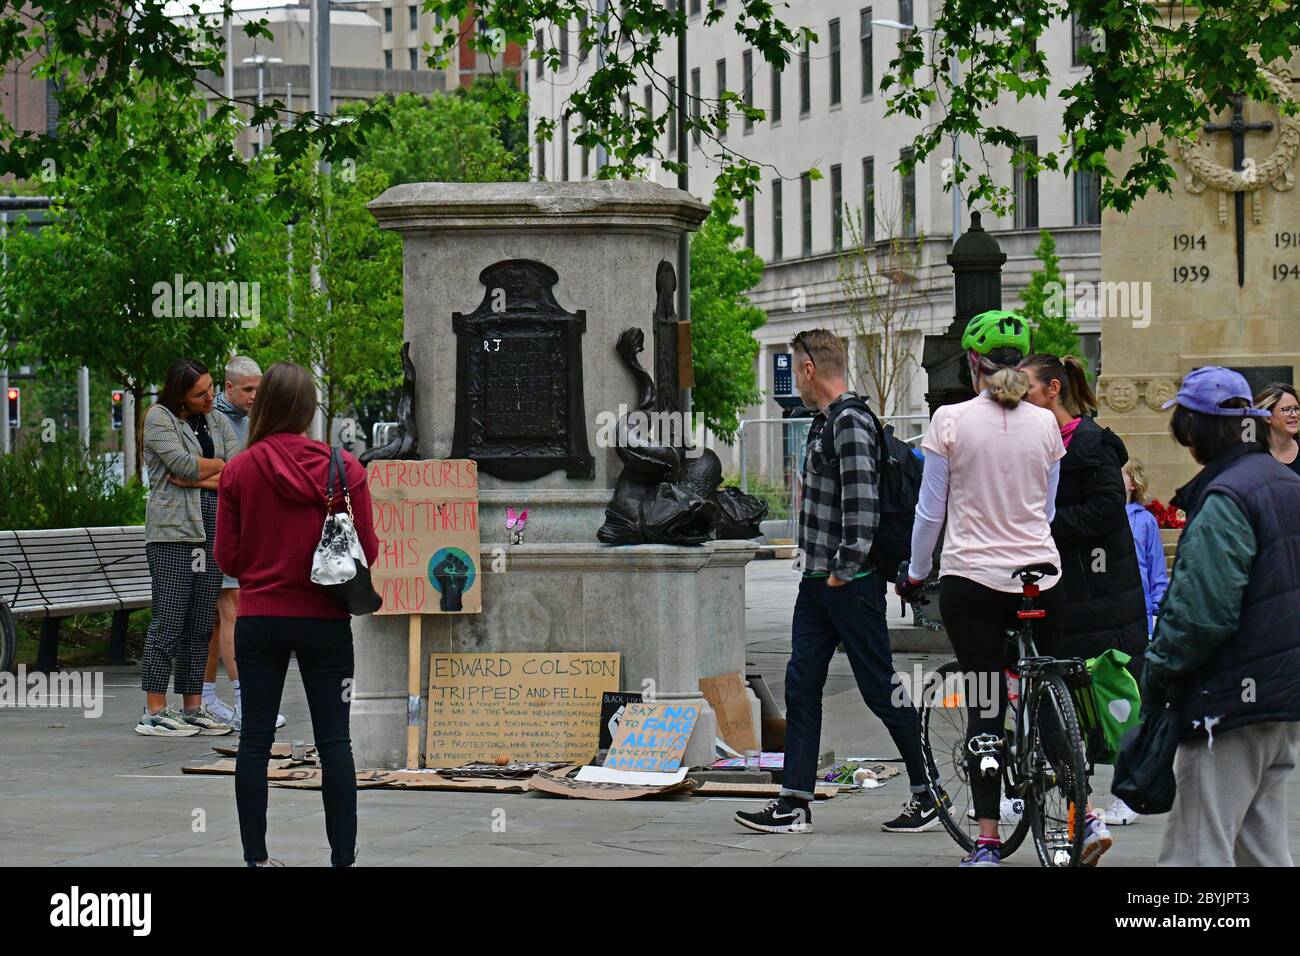 Bristol, UK. 10th June, 2020. 10th June 2020.Black Lives Matter.Toppling of Edward Colston in Bristol as crowds of people come to see the Plinth where he once Stood as a public figure head during the time of the slave trade.Picture Credit: Robert Timoney/Alamy Live News Stock Photo